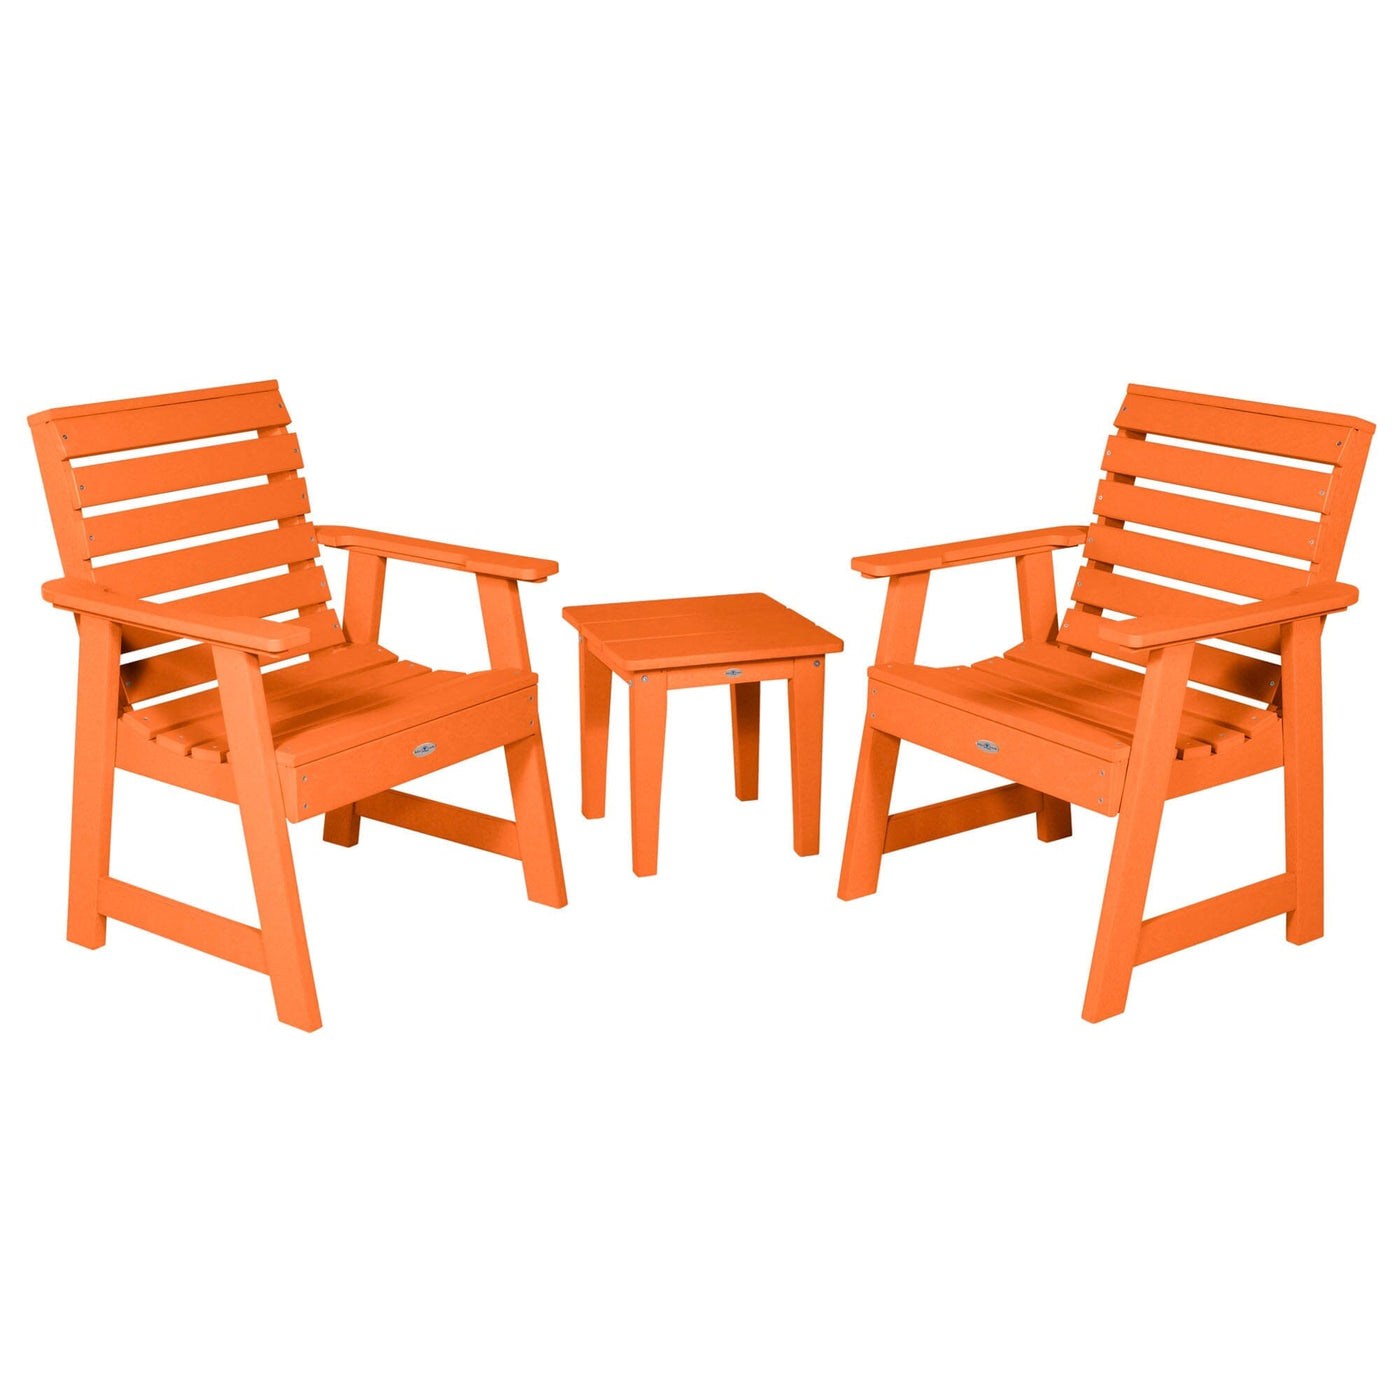 Two Riverside Garden Chairs and Side Table Set Kitted Set Bahia Verde Outdoors Citrus Orange 